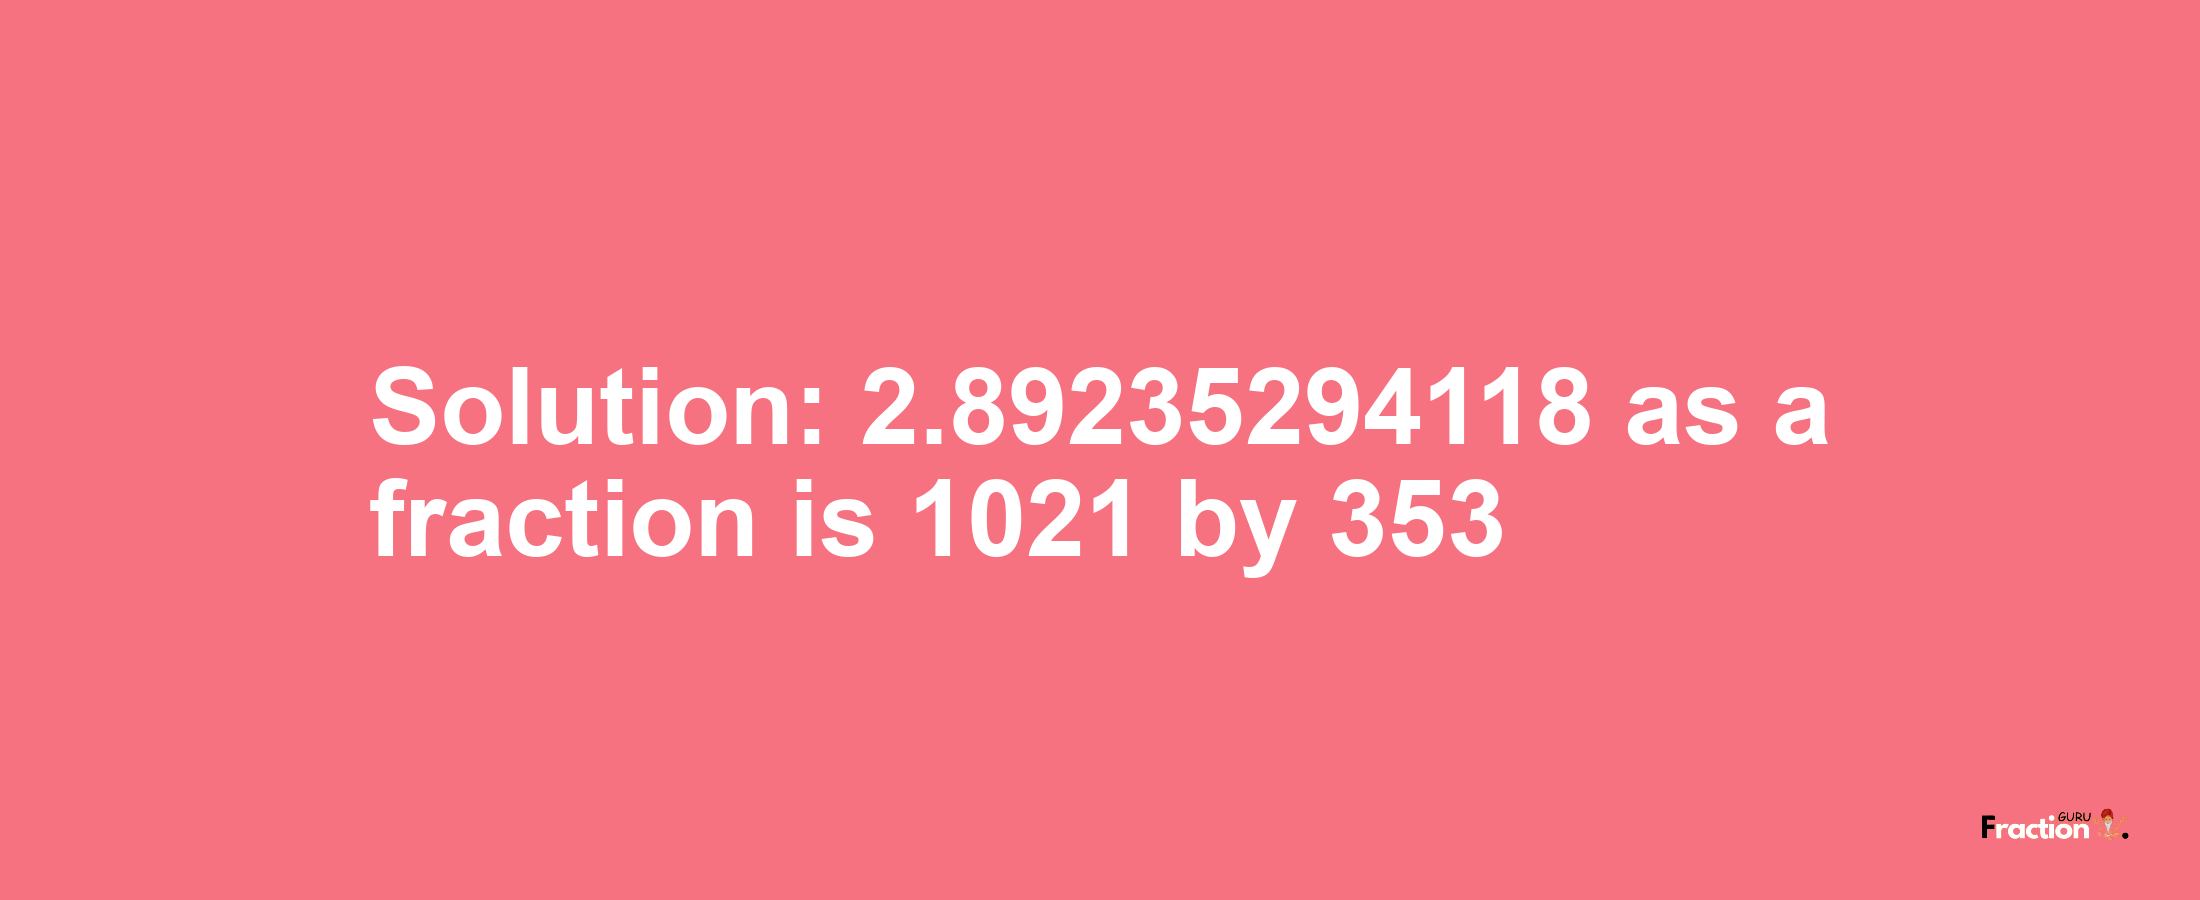 Solution:2.89235294118 as a fraction is 1021/353